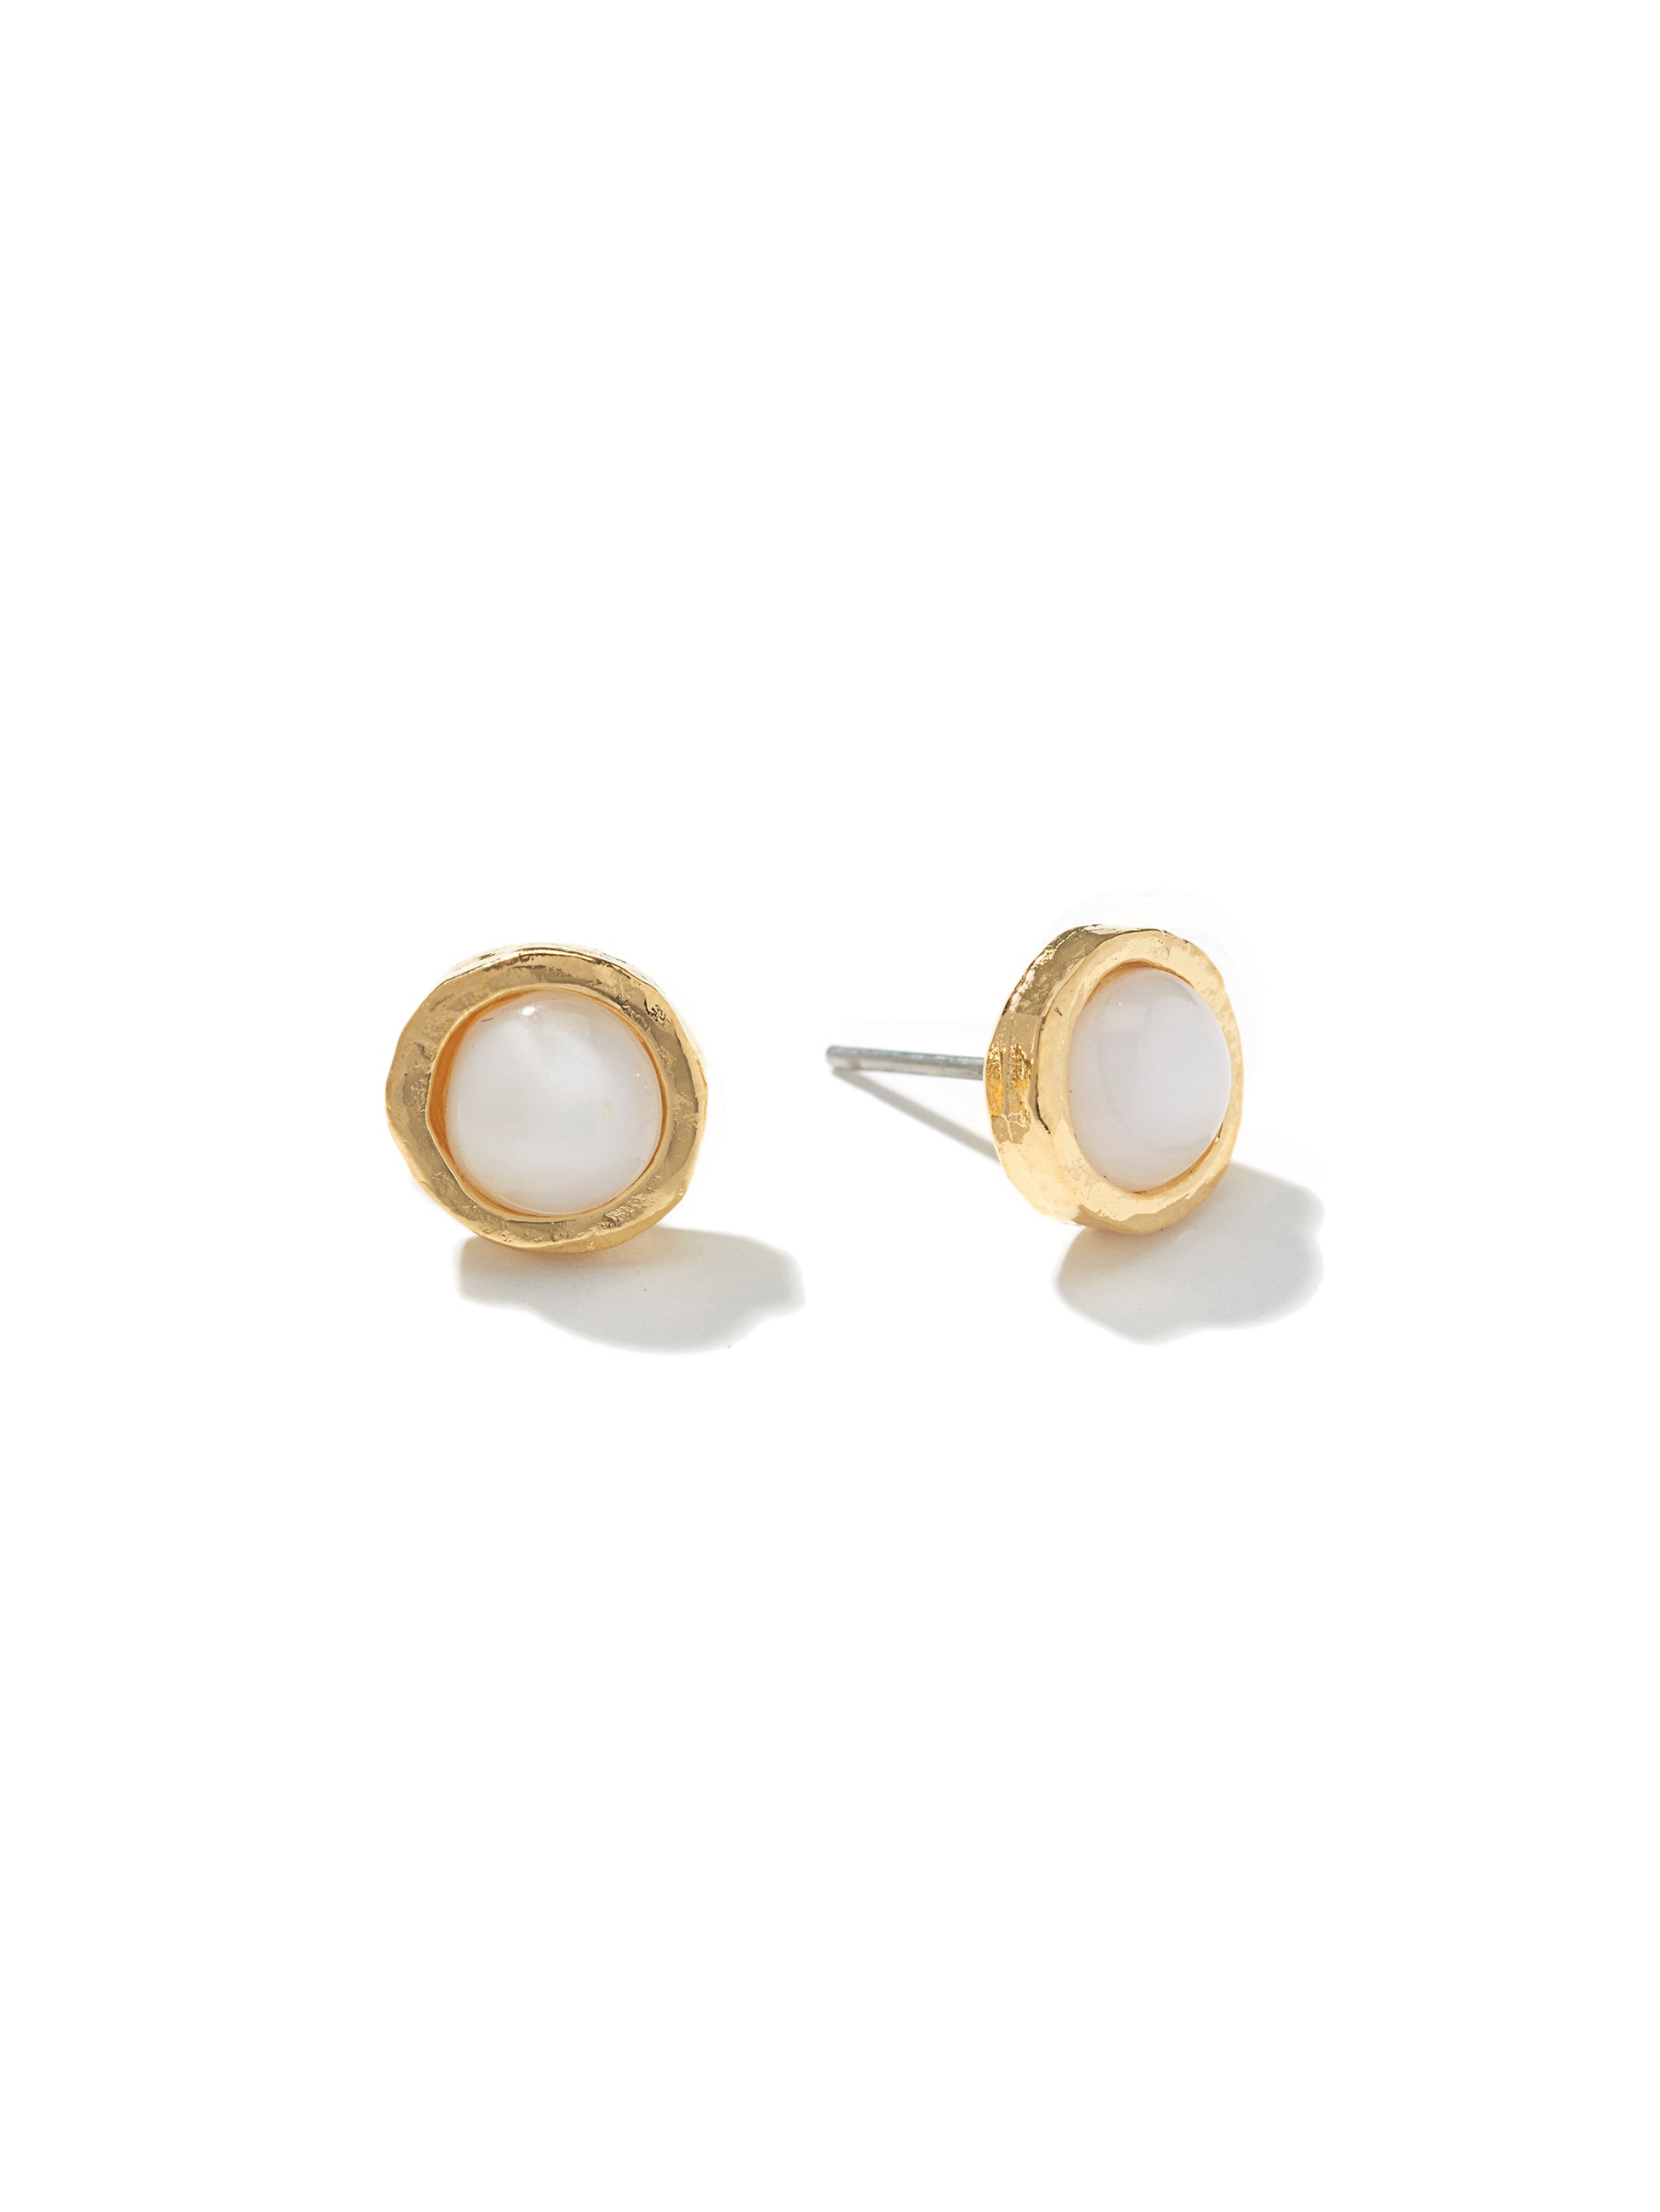 Hammered Gold Stud Earrings